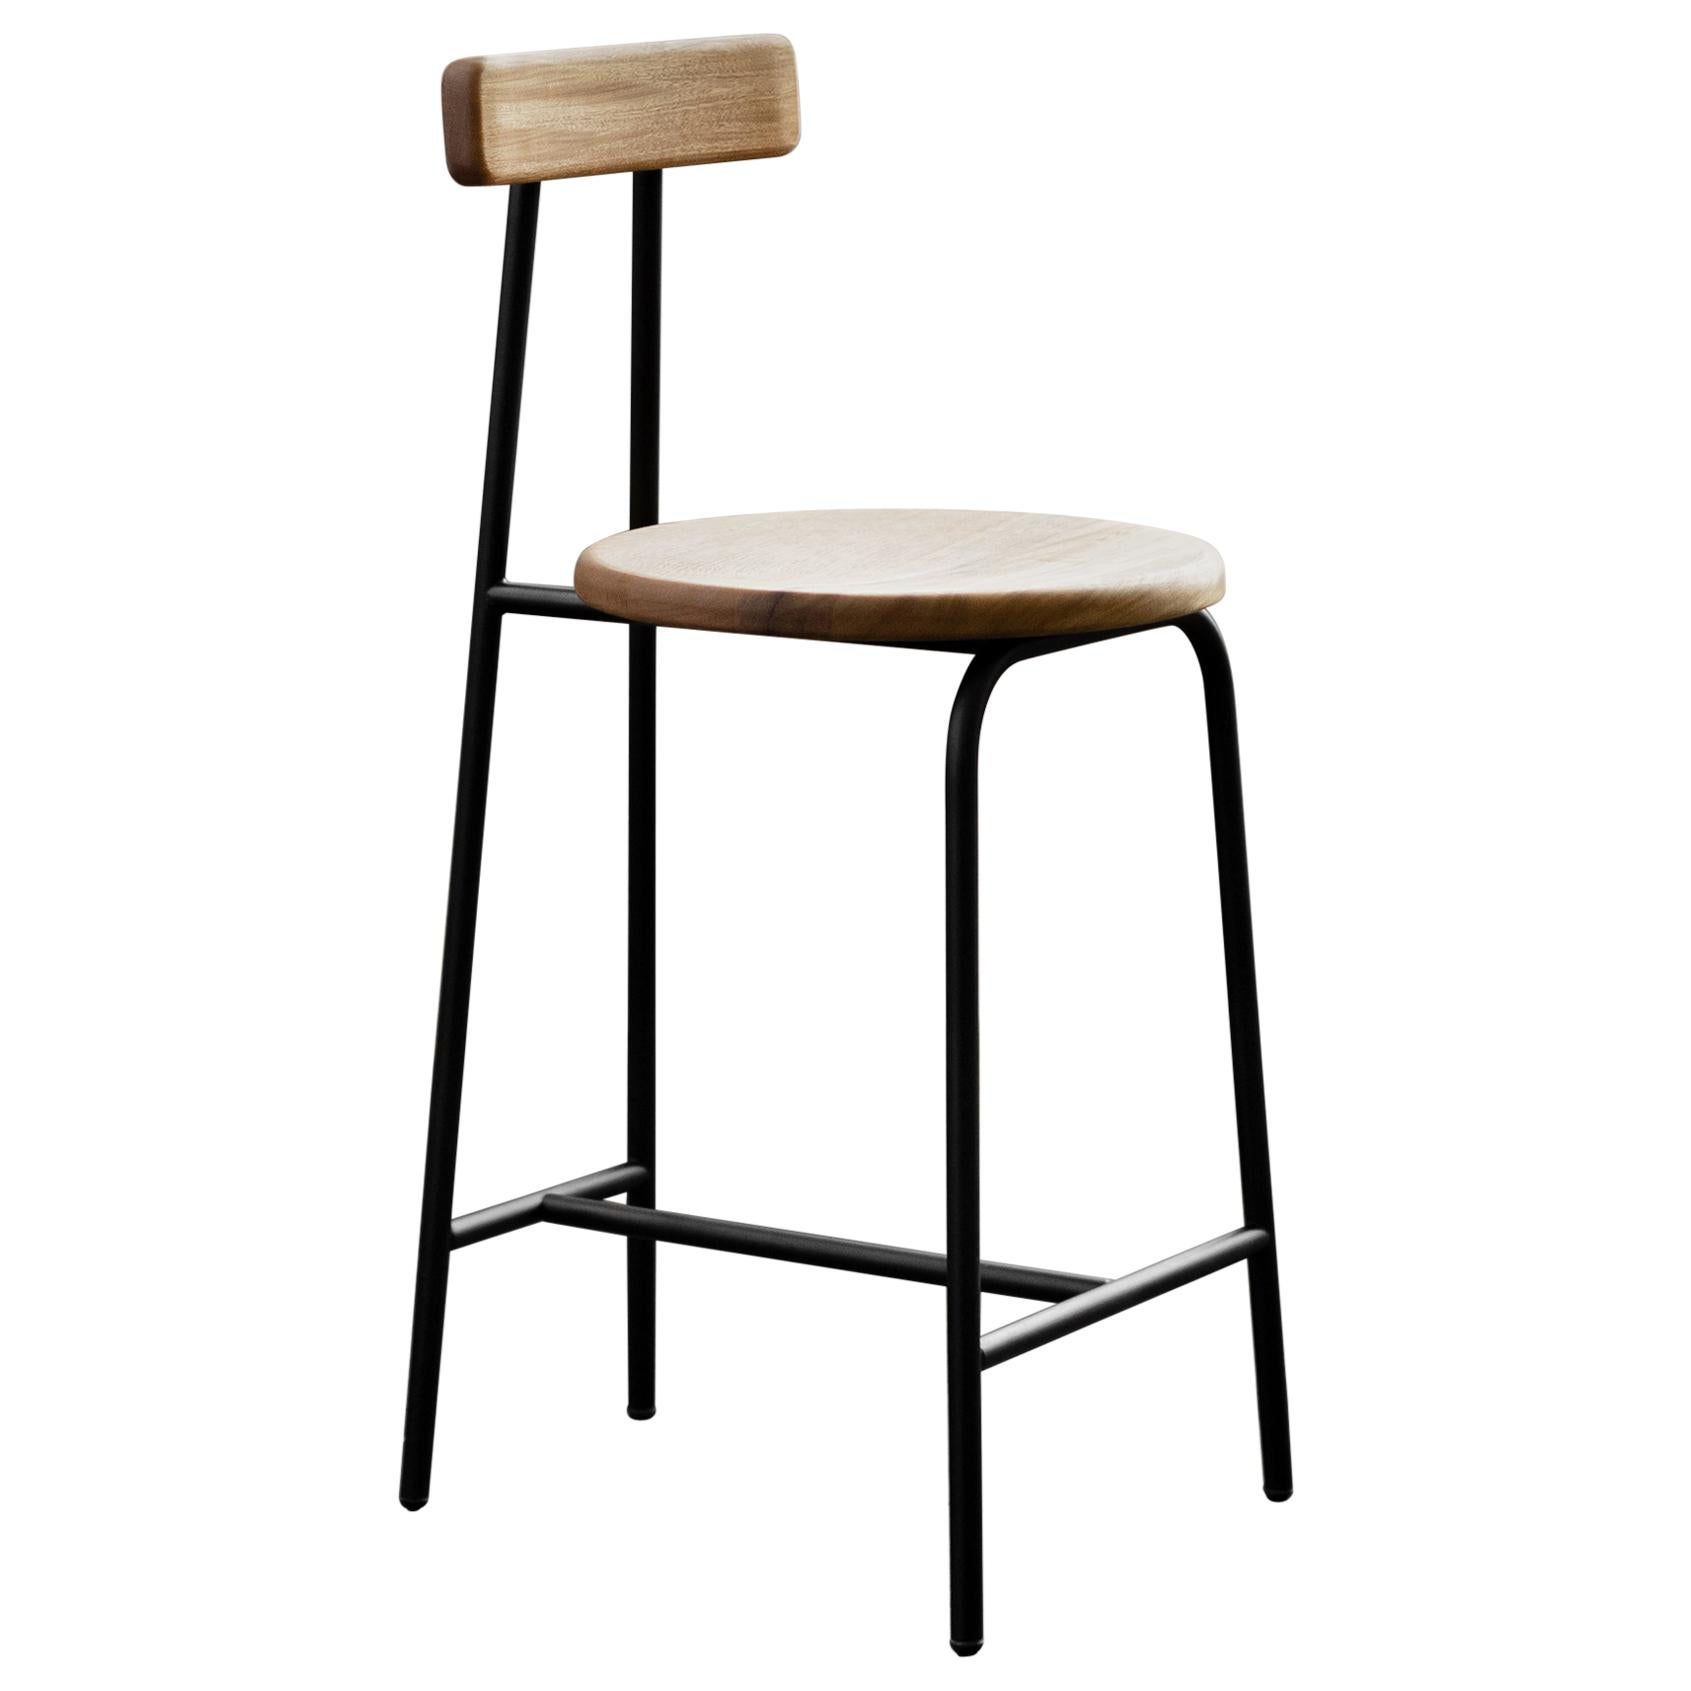 I Collection Wooden Stool with Metallic Structure